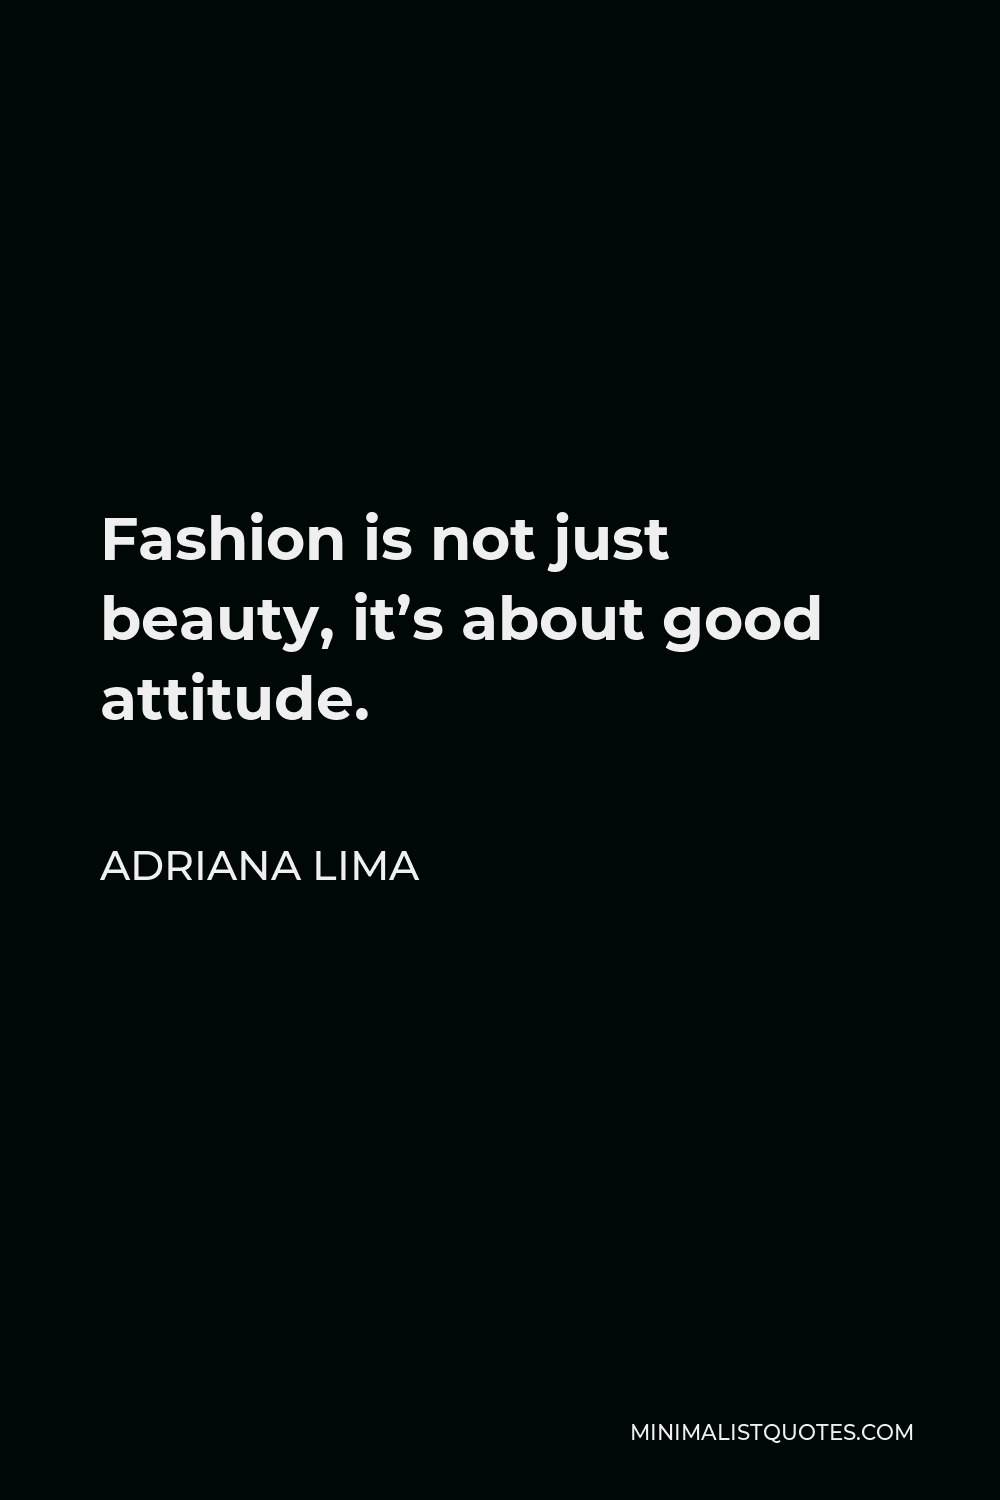 Adriana Lima Quote - Fashion is not just beauty, it’s about good attitude.